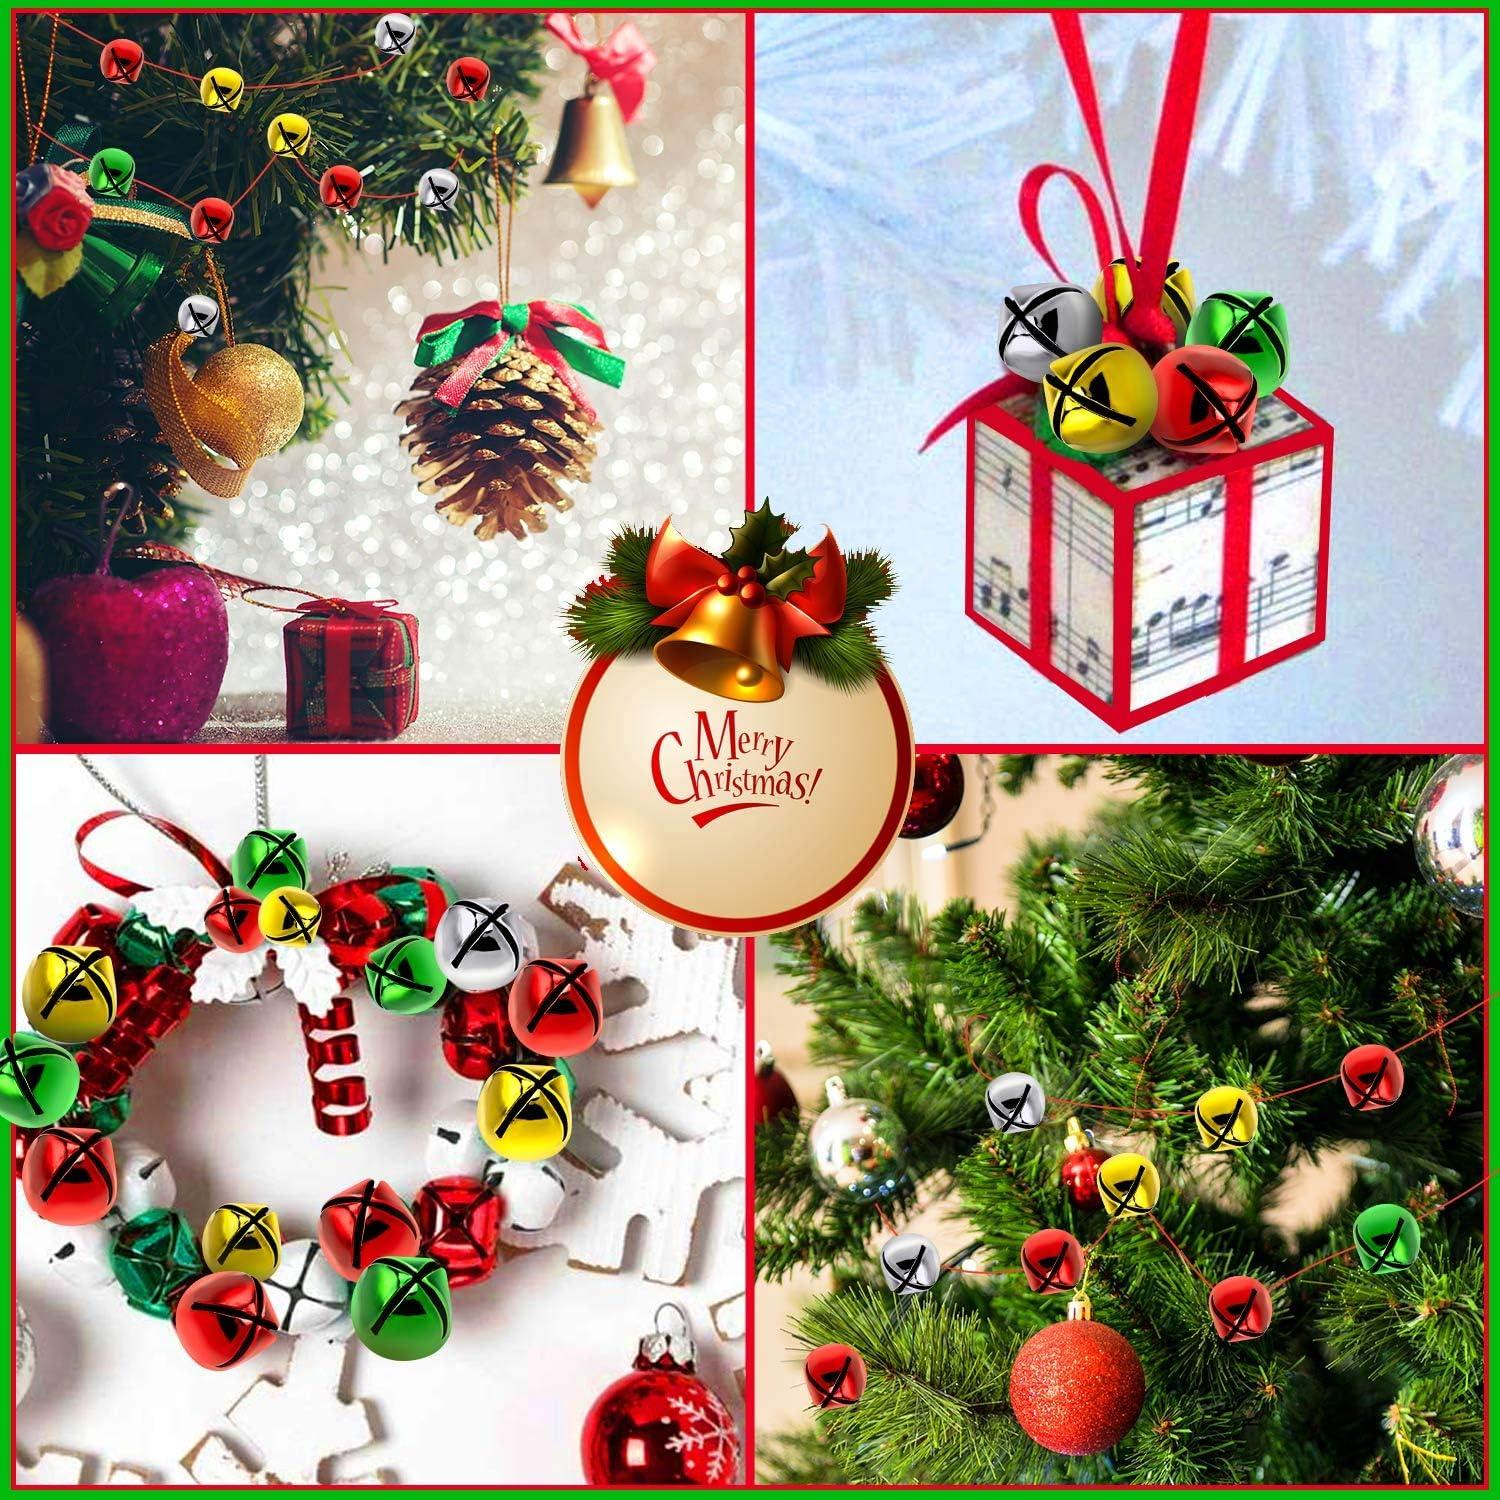 Jingle Bells, 200 Pieces Colorful Jingle Bells for Crafts, 4 Colors Mixed  Small Christmas Jingle Bells, Metal Craft Bells for Wreath Holiday Home and  Christmas Decoration (0.3/0.4/0.47 inch)